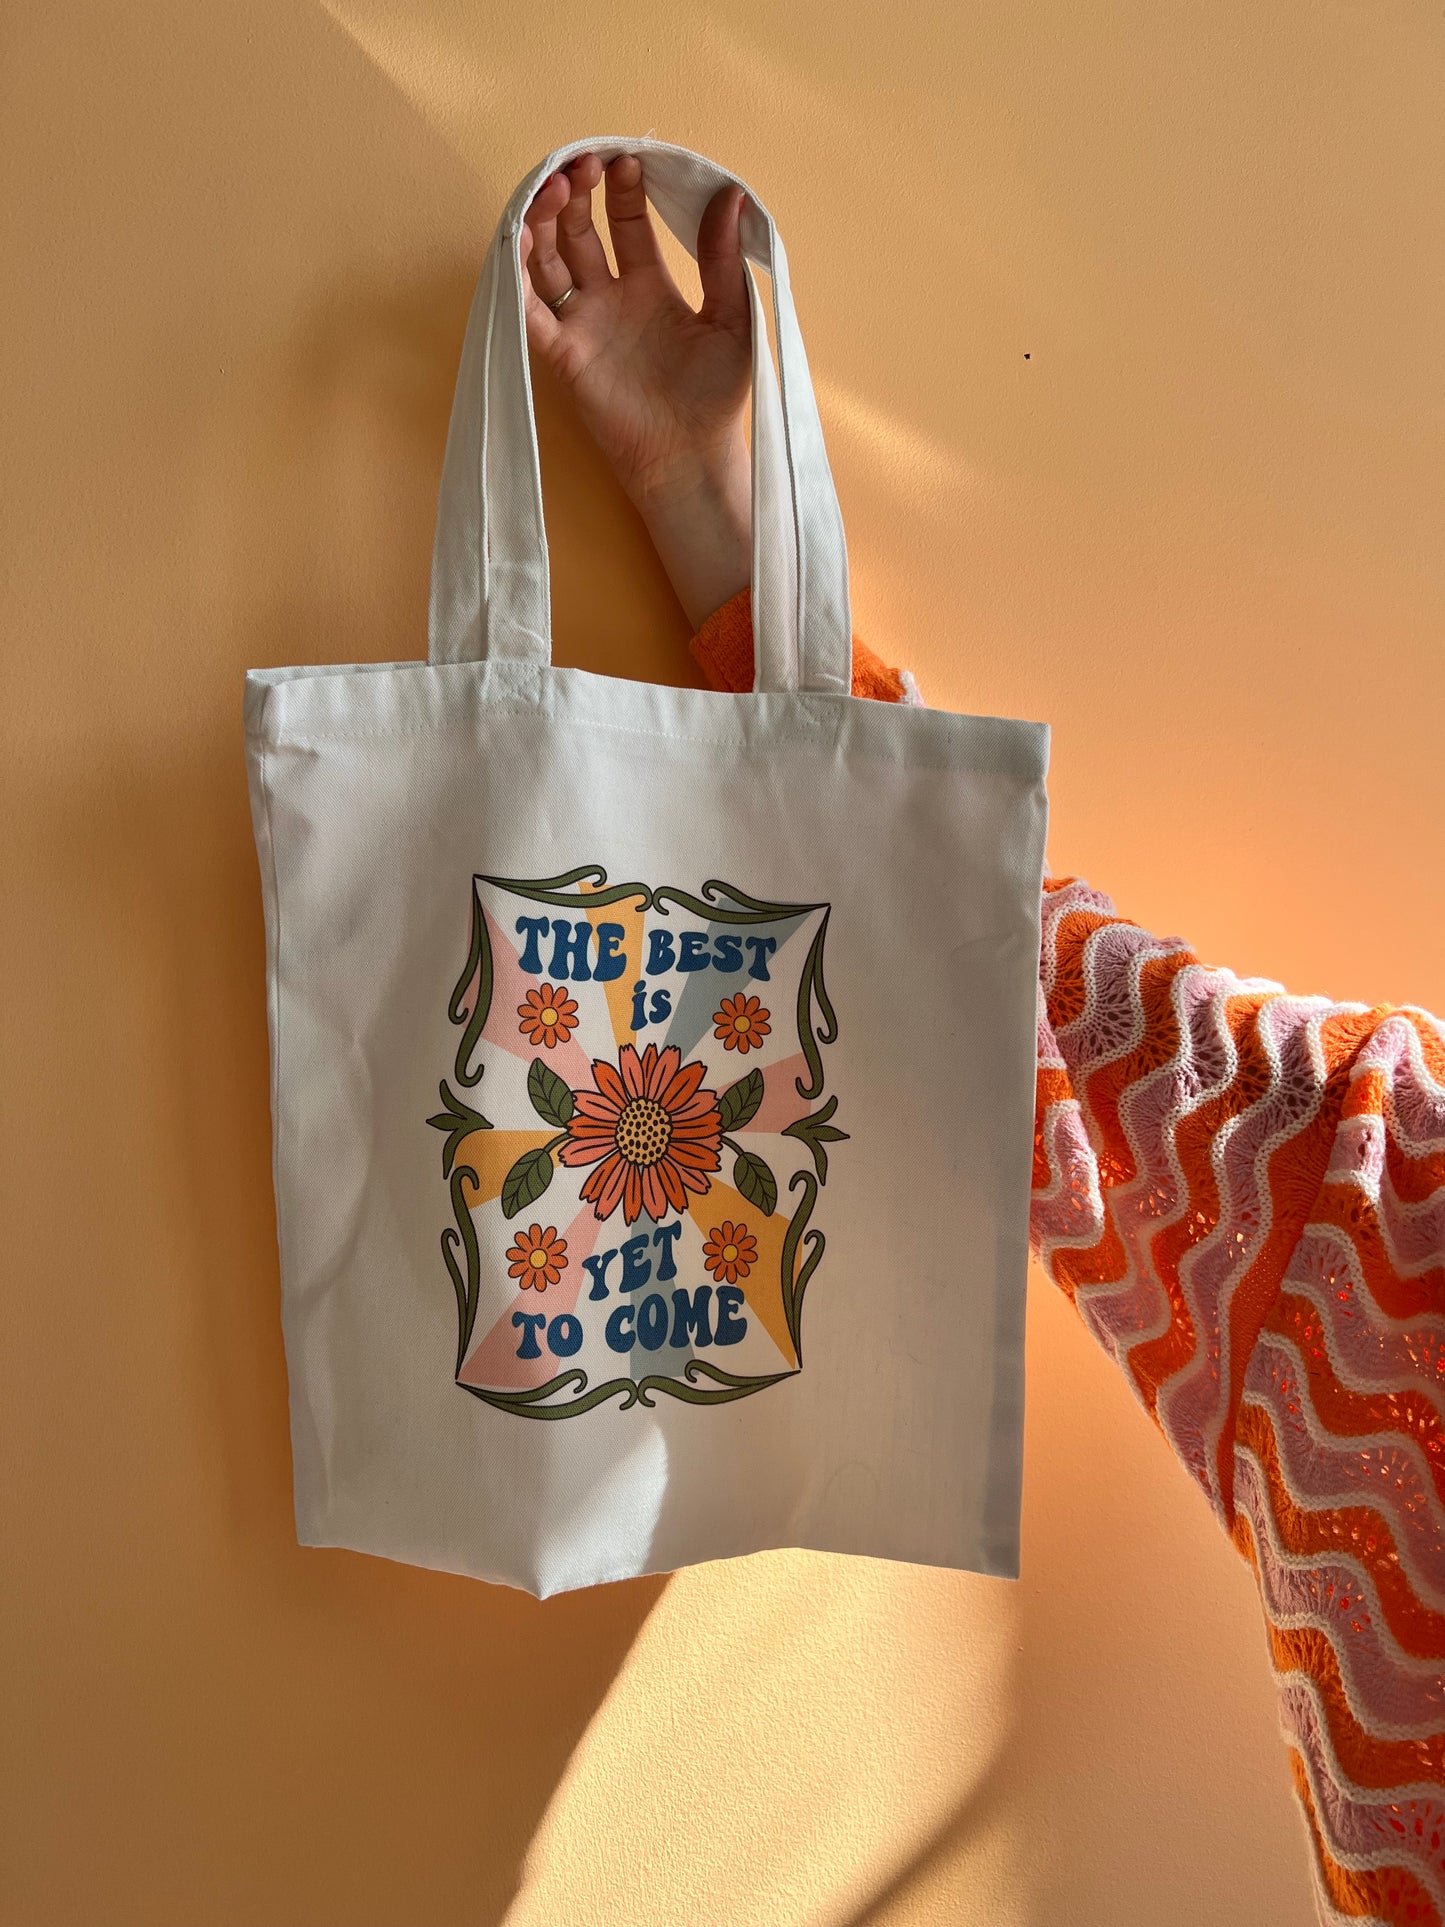 The Best is Yet to Come-Tote Bag